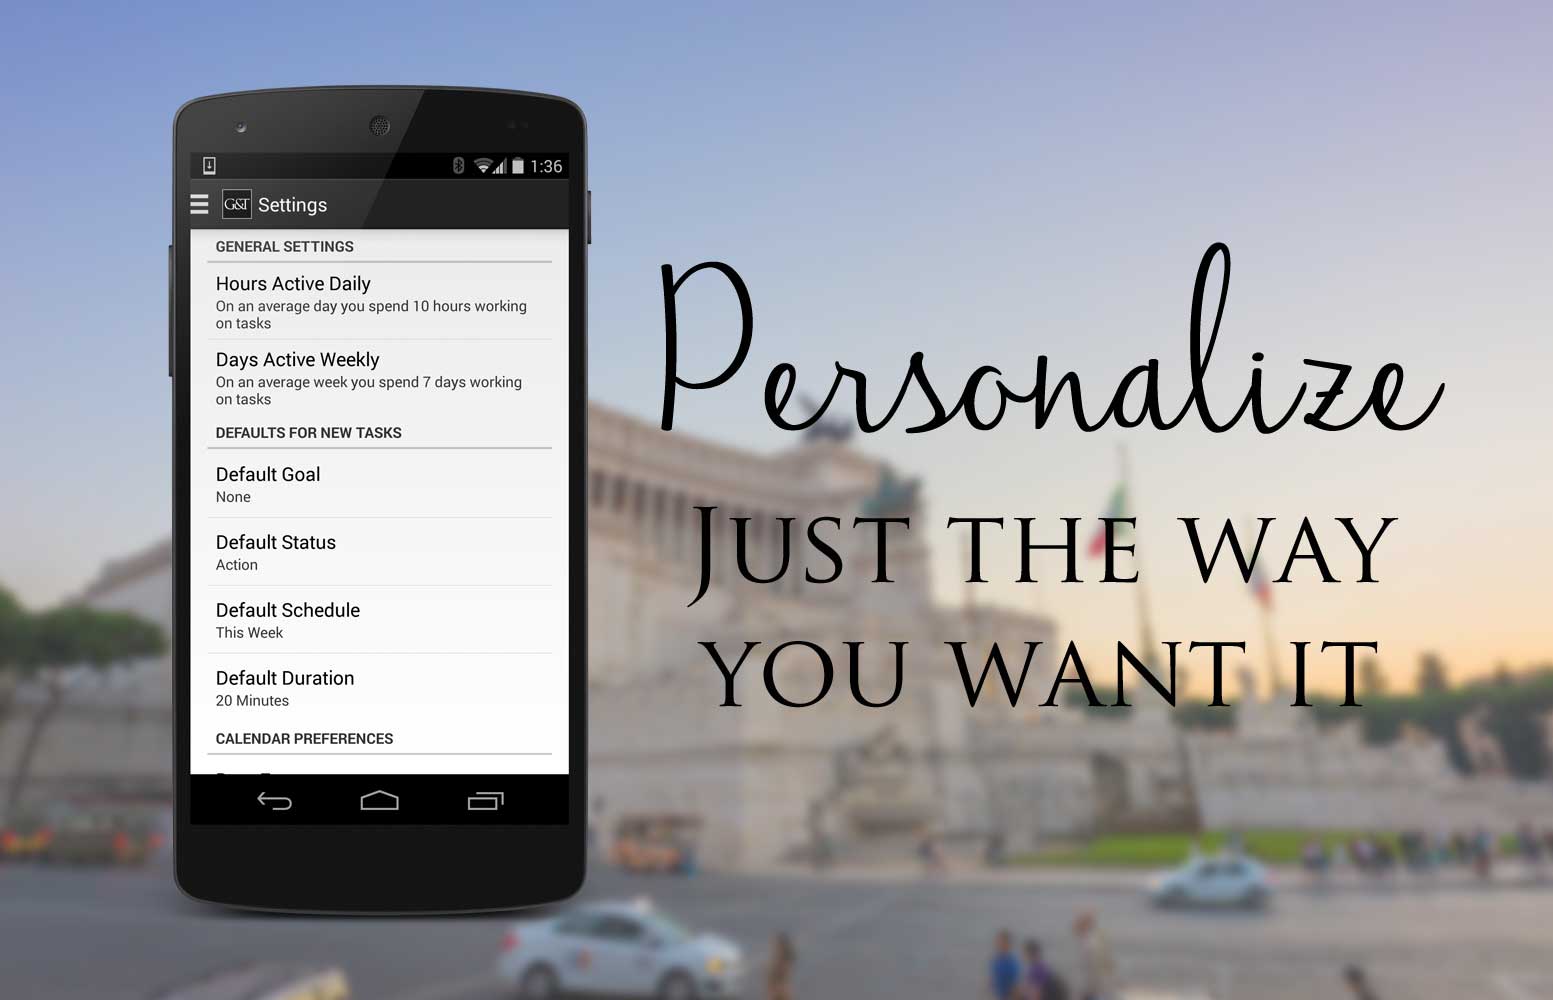 Personalize - Just the way you want it - Simply Goals & Tasks - Release 0.04 - Settings Update